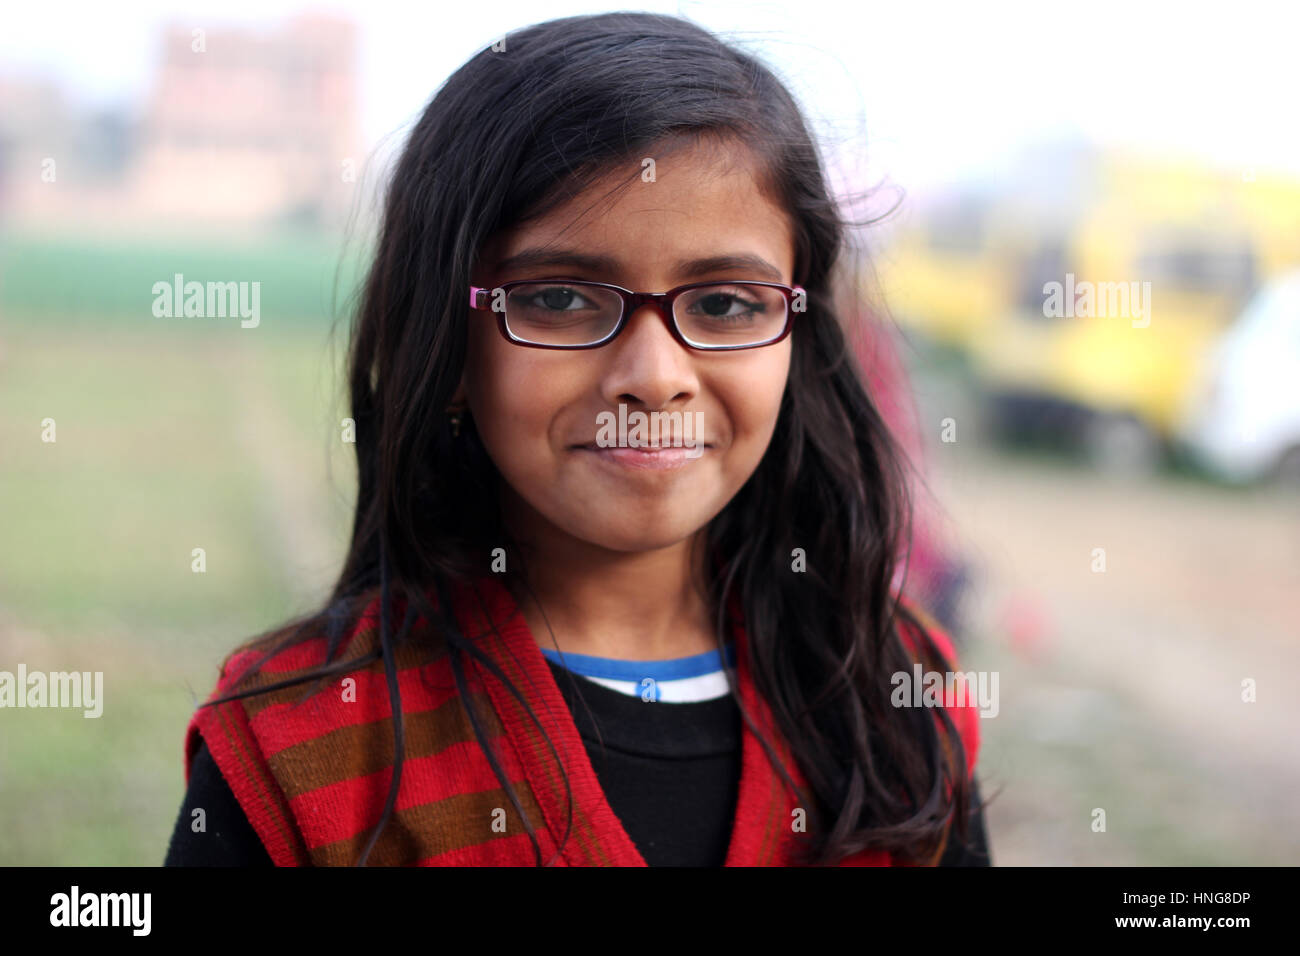 Indian young smiling female kid with spectacles Stock Photo